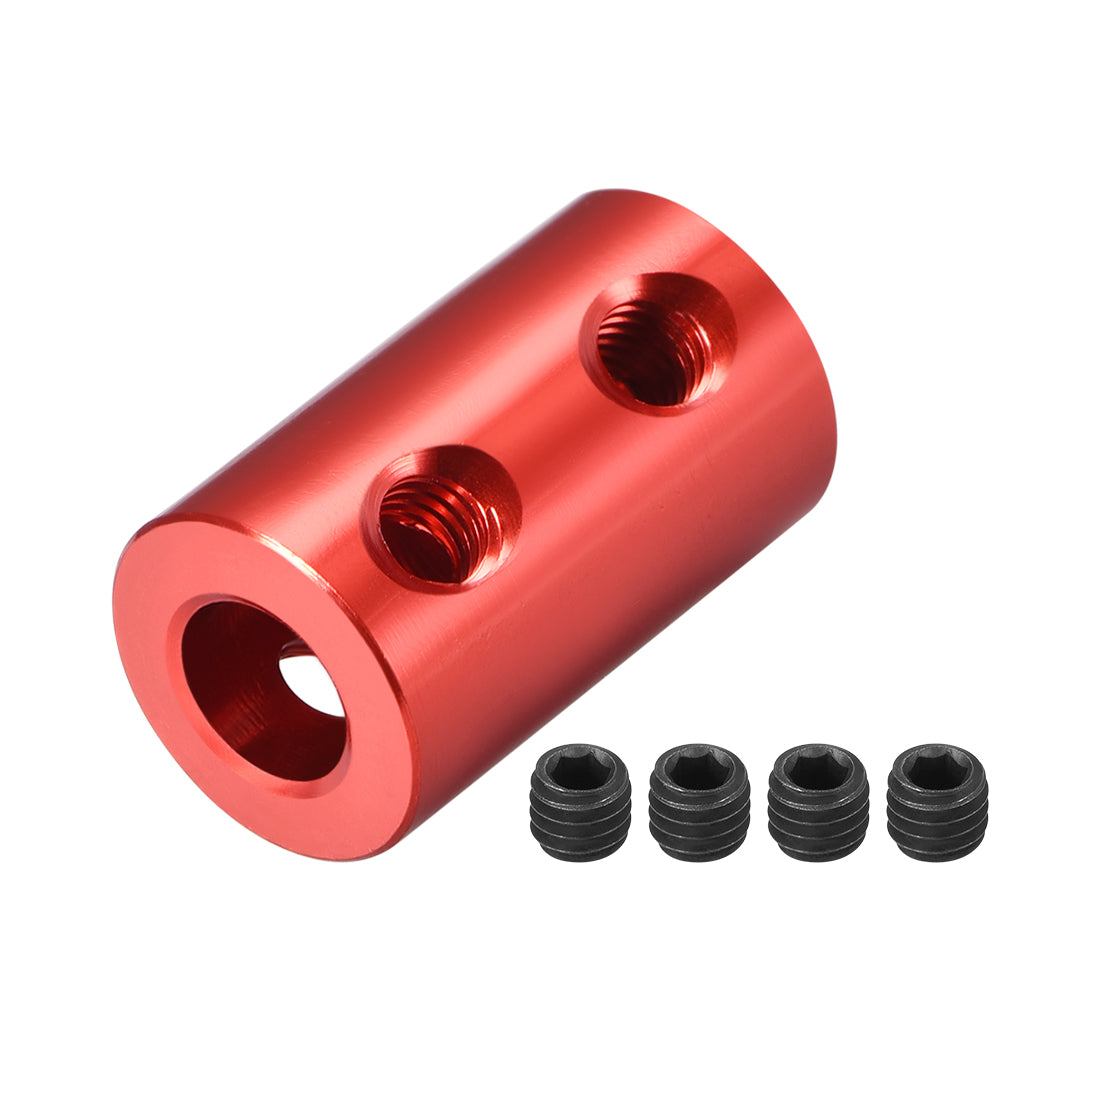 uxcell Uxcell Shaft Coupling 3mm to 6mm Bore L20xD12 Robot Motor Wheel Rigid Coupler Connector Red